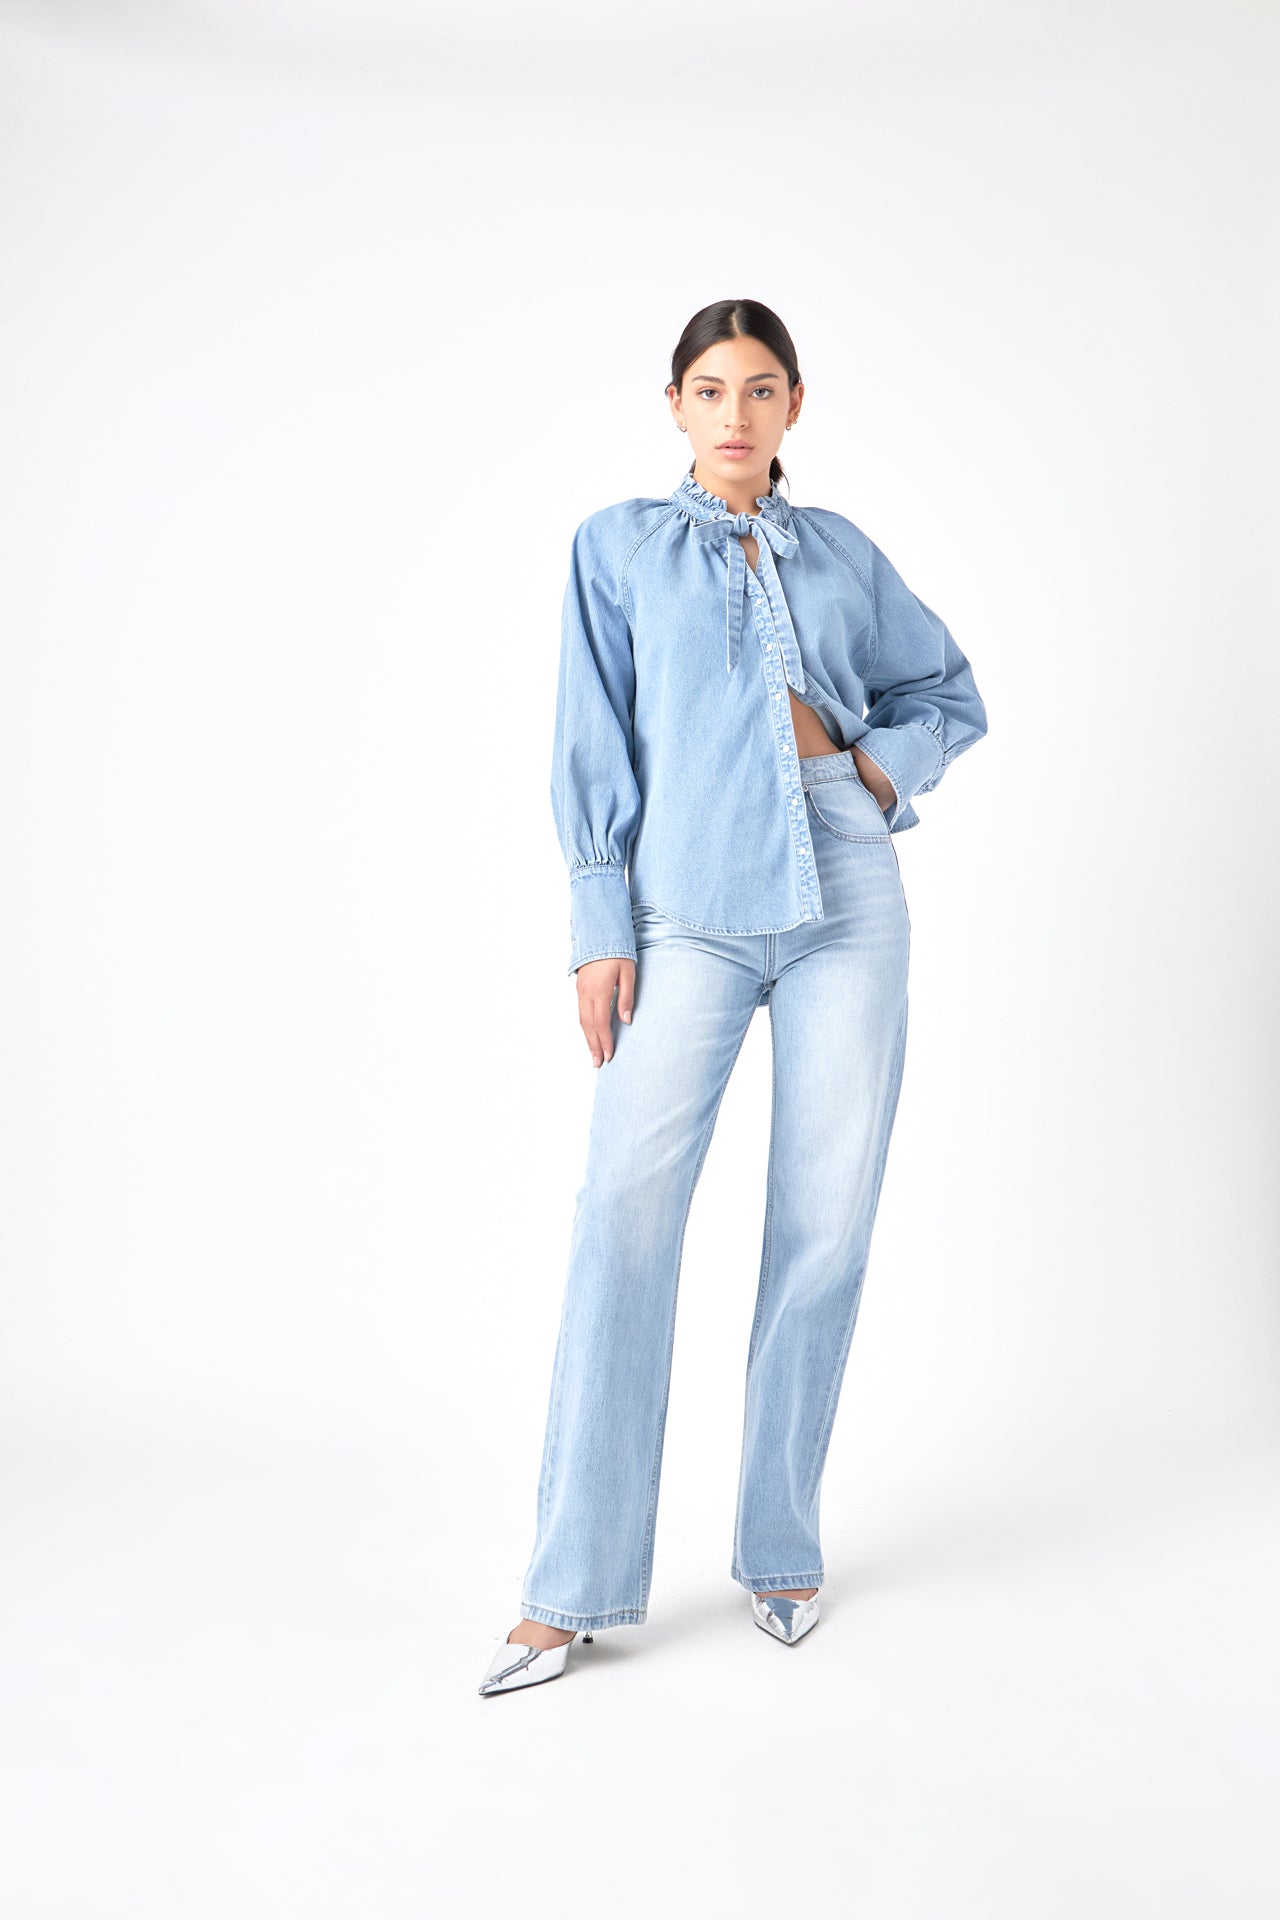 GREY LAB-Denim Shirt with Tie-SHIRTS & BLOUSES available at Objectrare